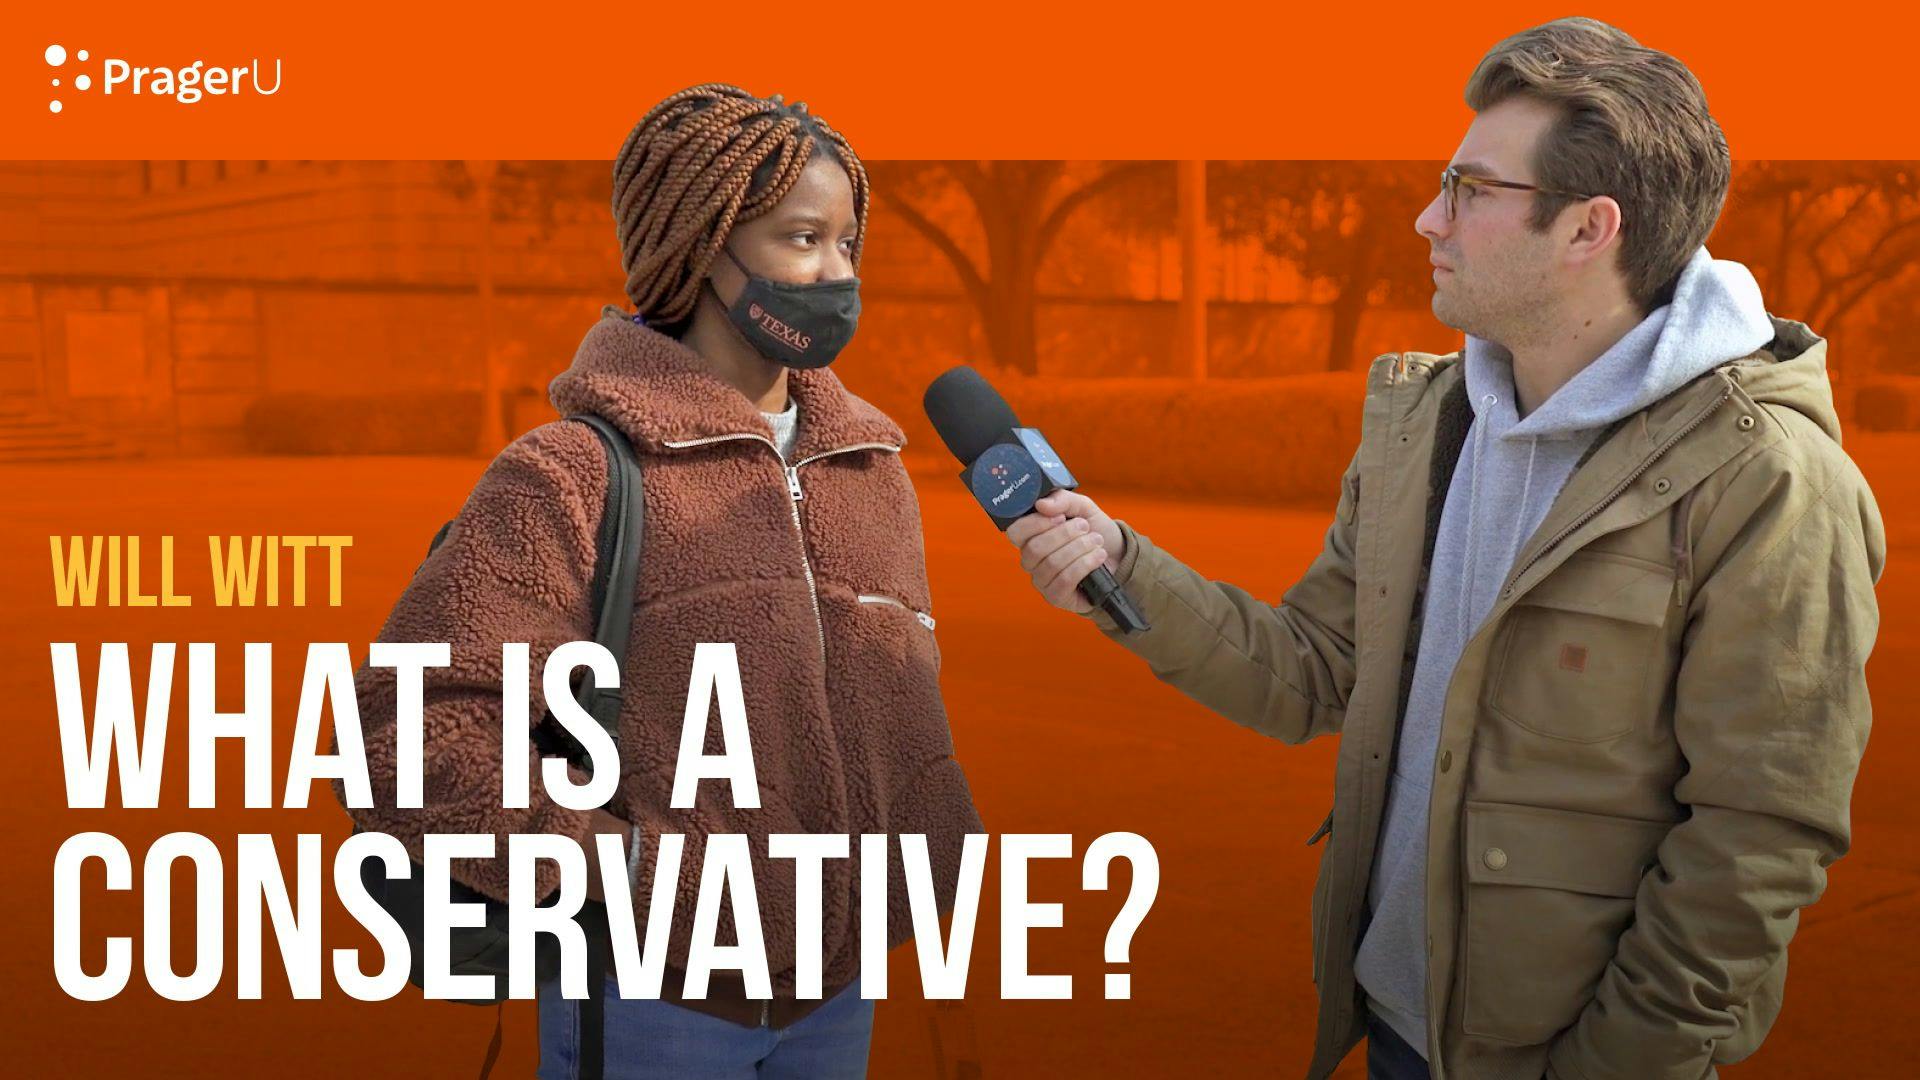 What Is a Conservative?